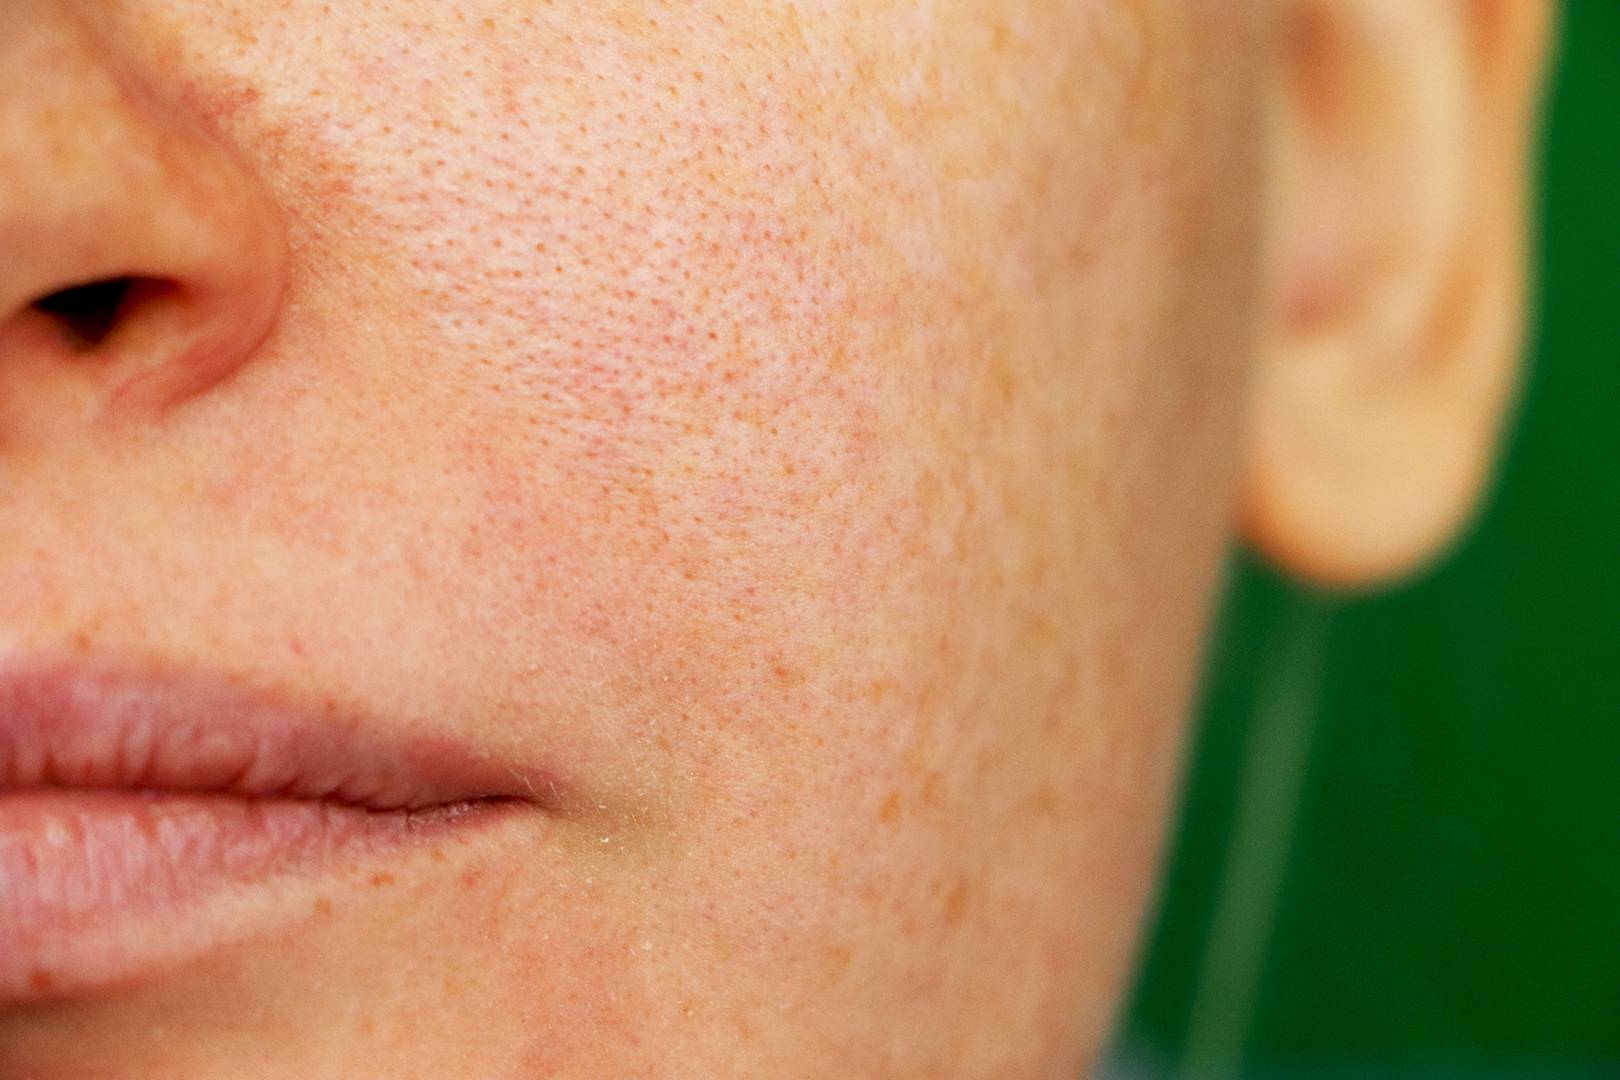 Close the open pores of the face with this home remedy in just 3 days